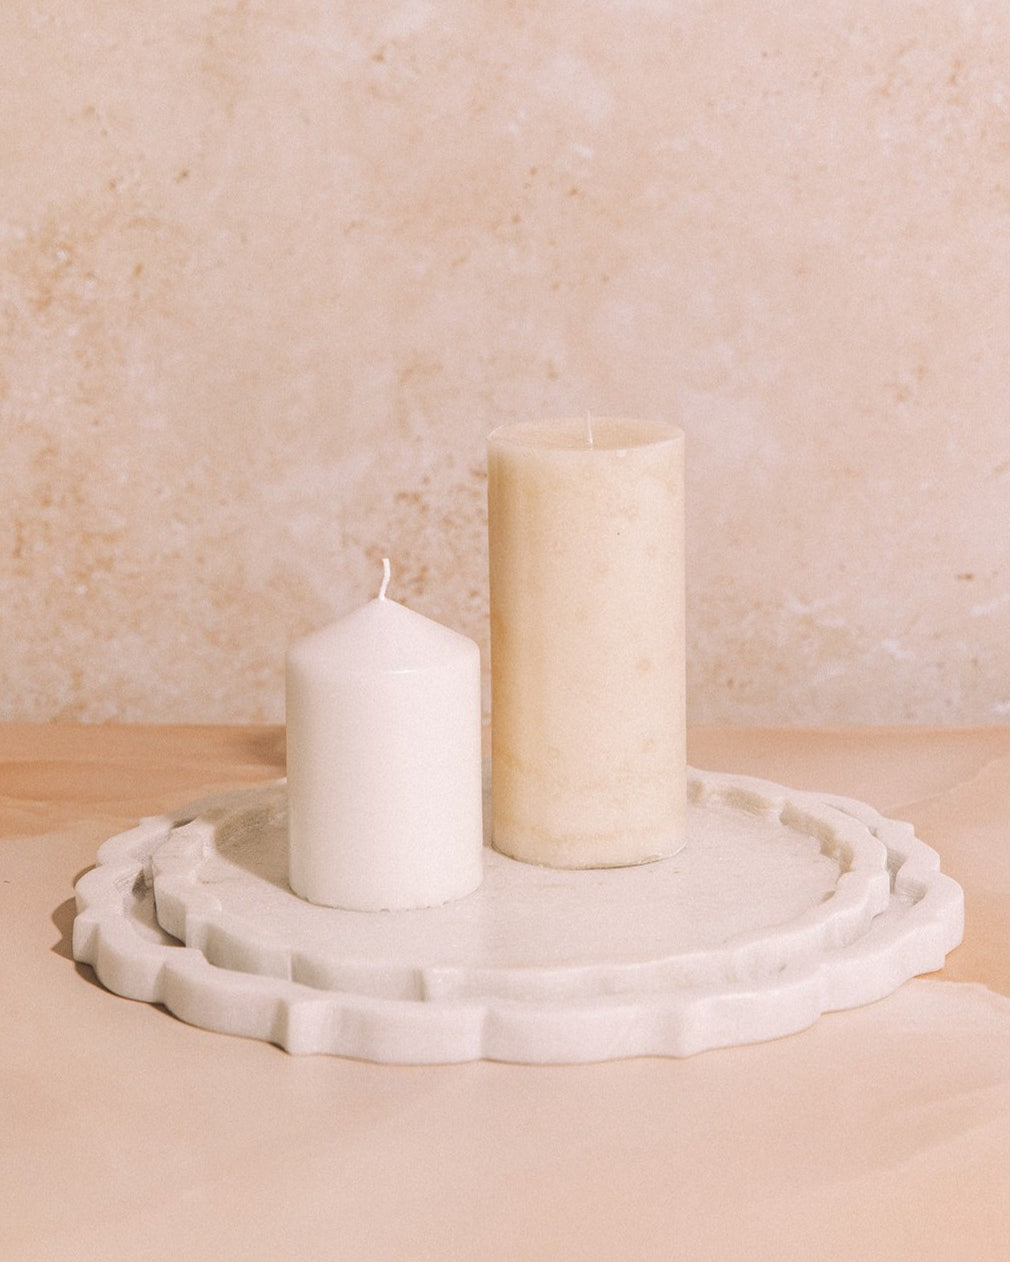 Beautiful Marble decorative tray carrying Candle